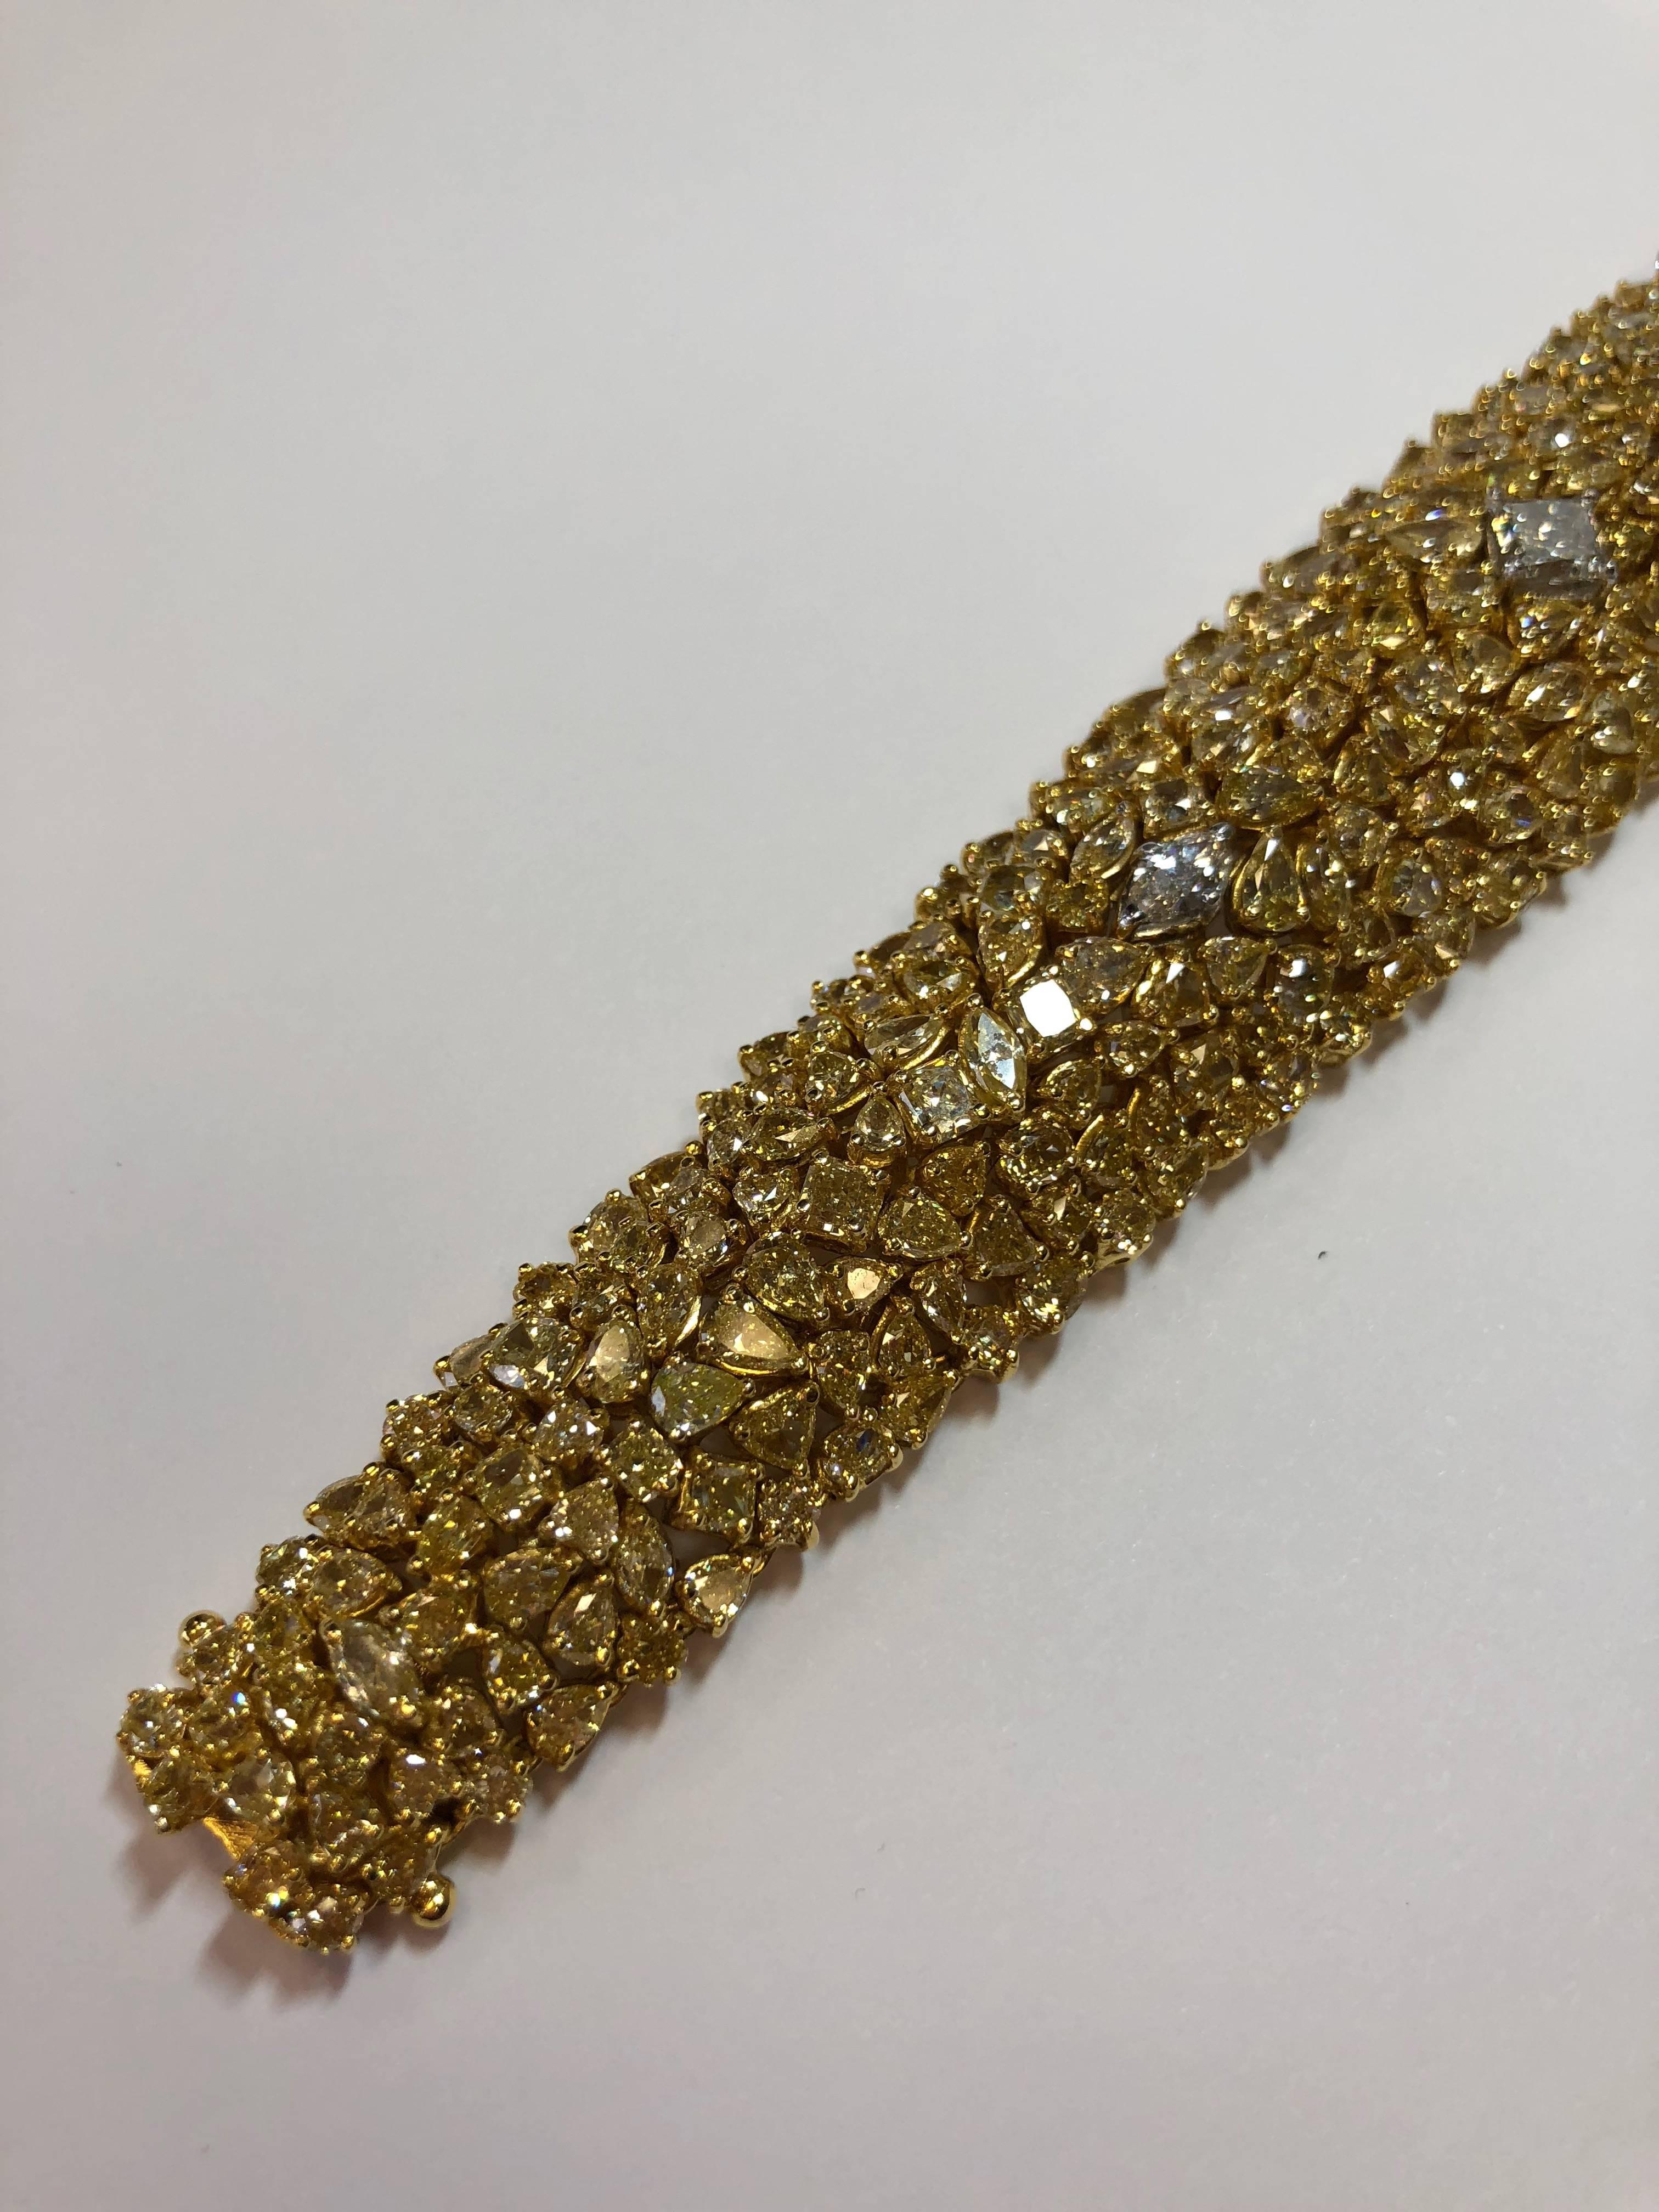 38.08 carats of gorgeous yellow diamonds in multi-shapes with 1.51 carats of white diamond marquise and square shapes in 18k yellow gold.  This cluster design bracelet is classic and perfect for any occasion!  The length of this bracelet is 7